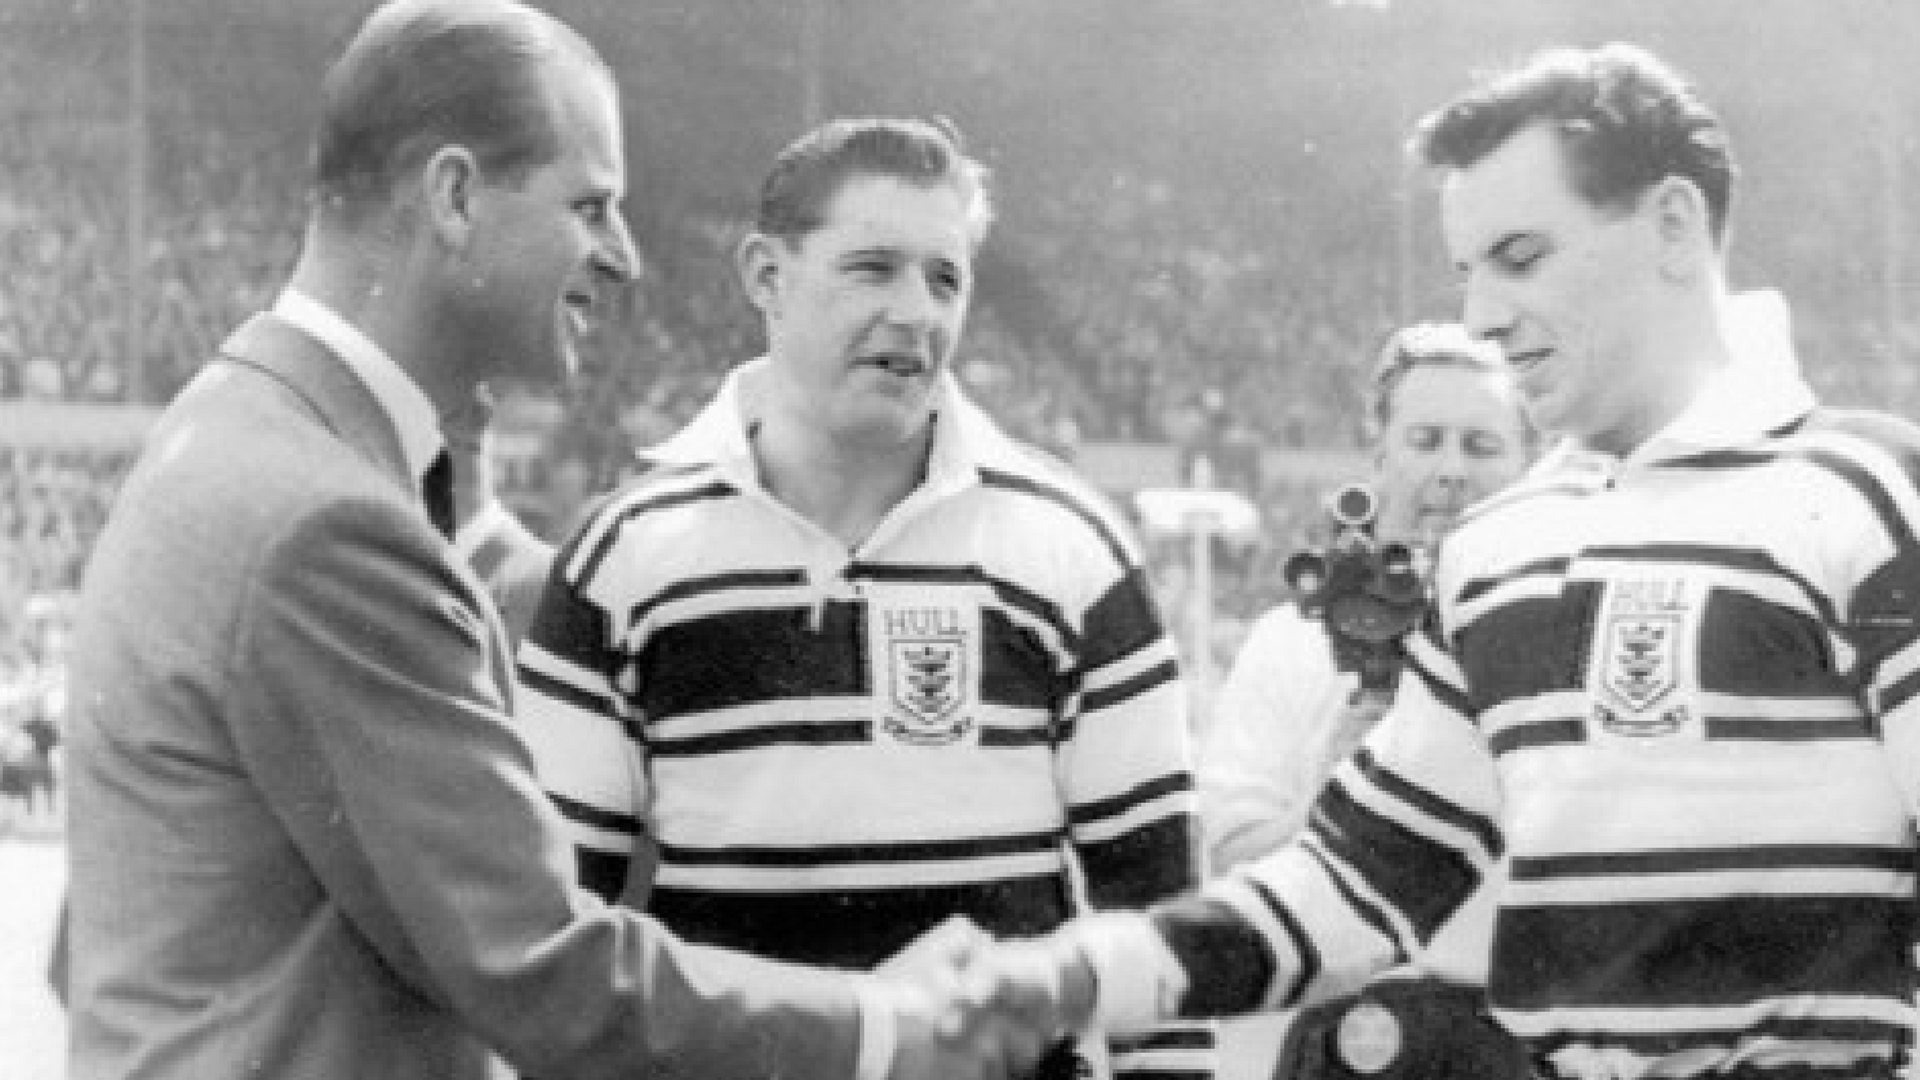 Hull FC's players are greeted by HRH Prince Phillip ahead of the 1960 Challenge Cup Final - only the club's seconds appearance at the national stadium.